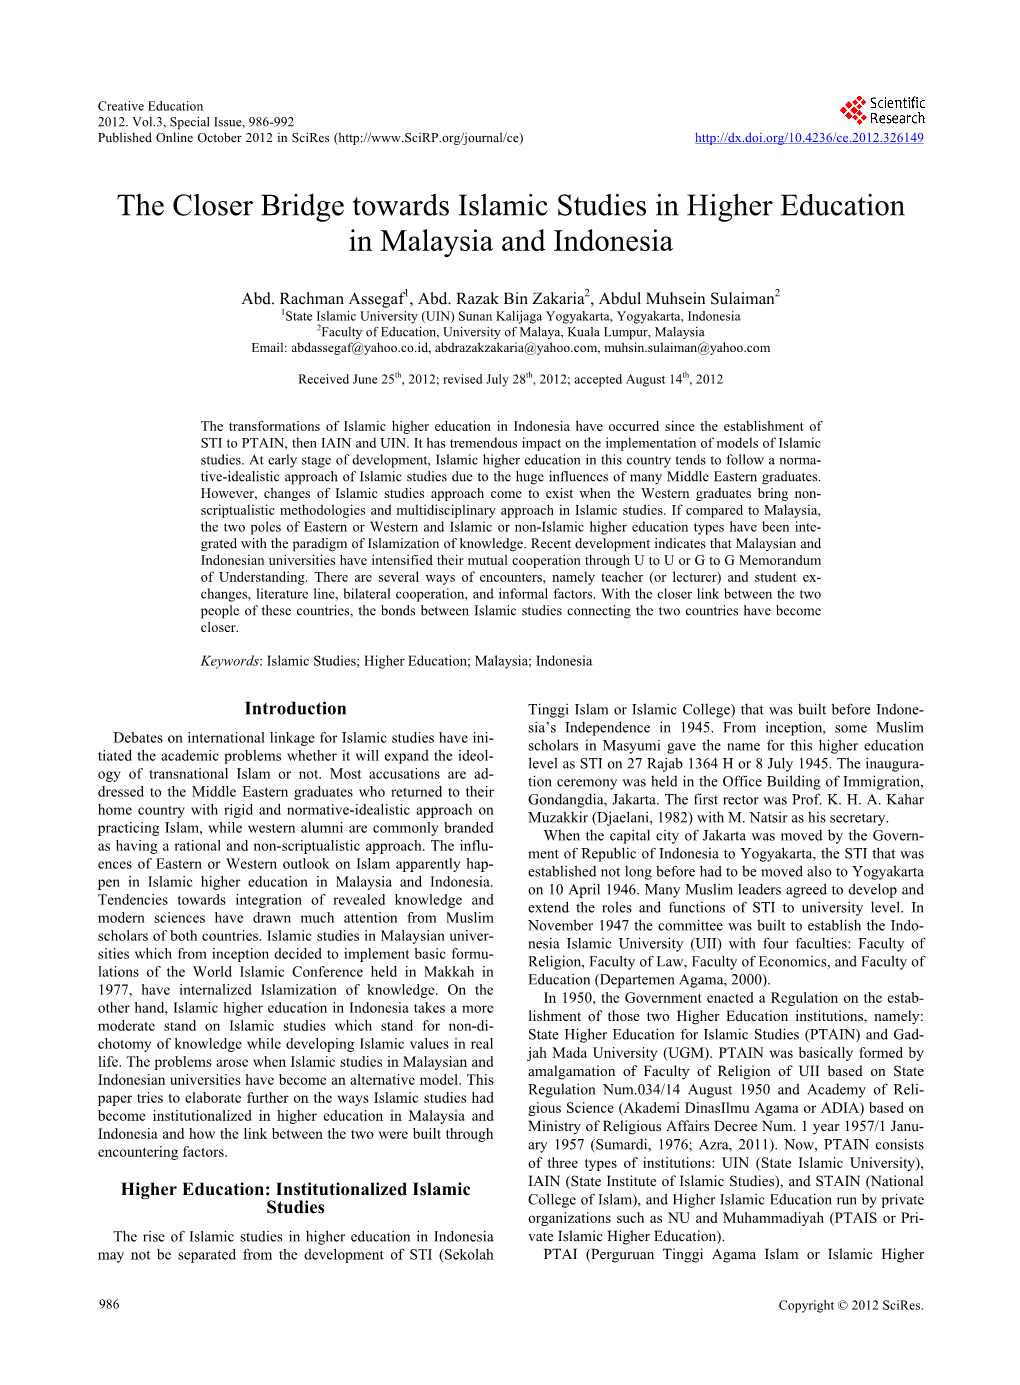 The Closer Bridge Towards Islamic Studies in Higher Education in Malaysia and Indonesia